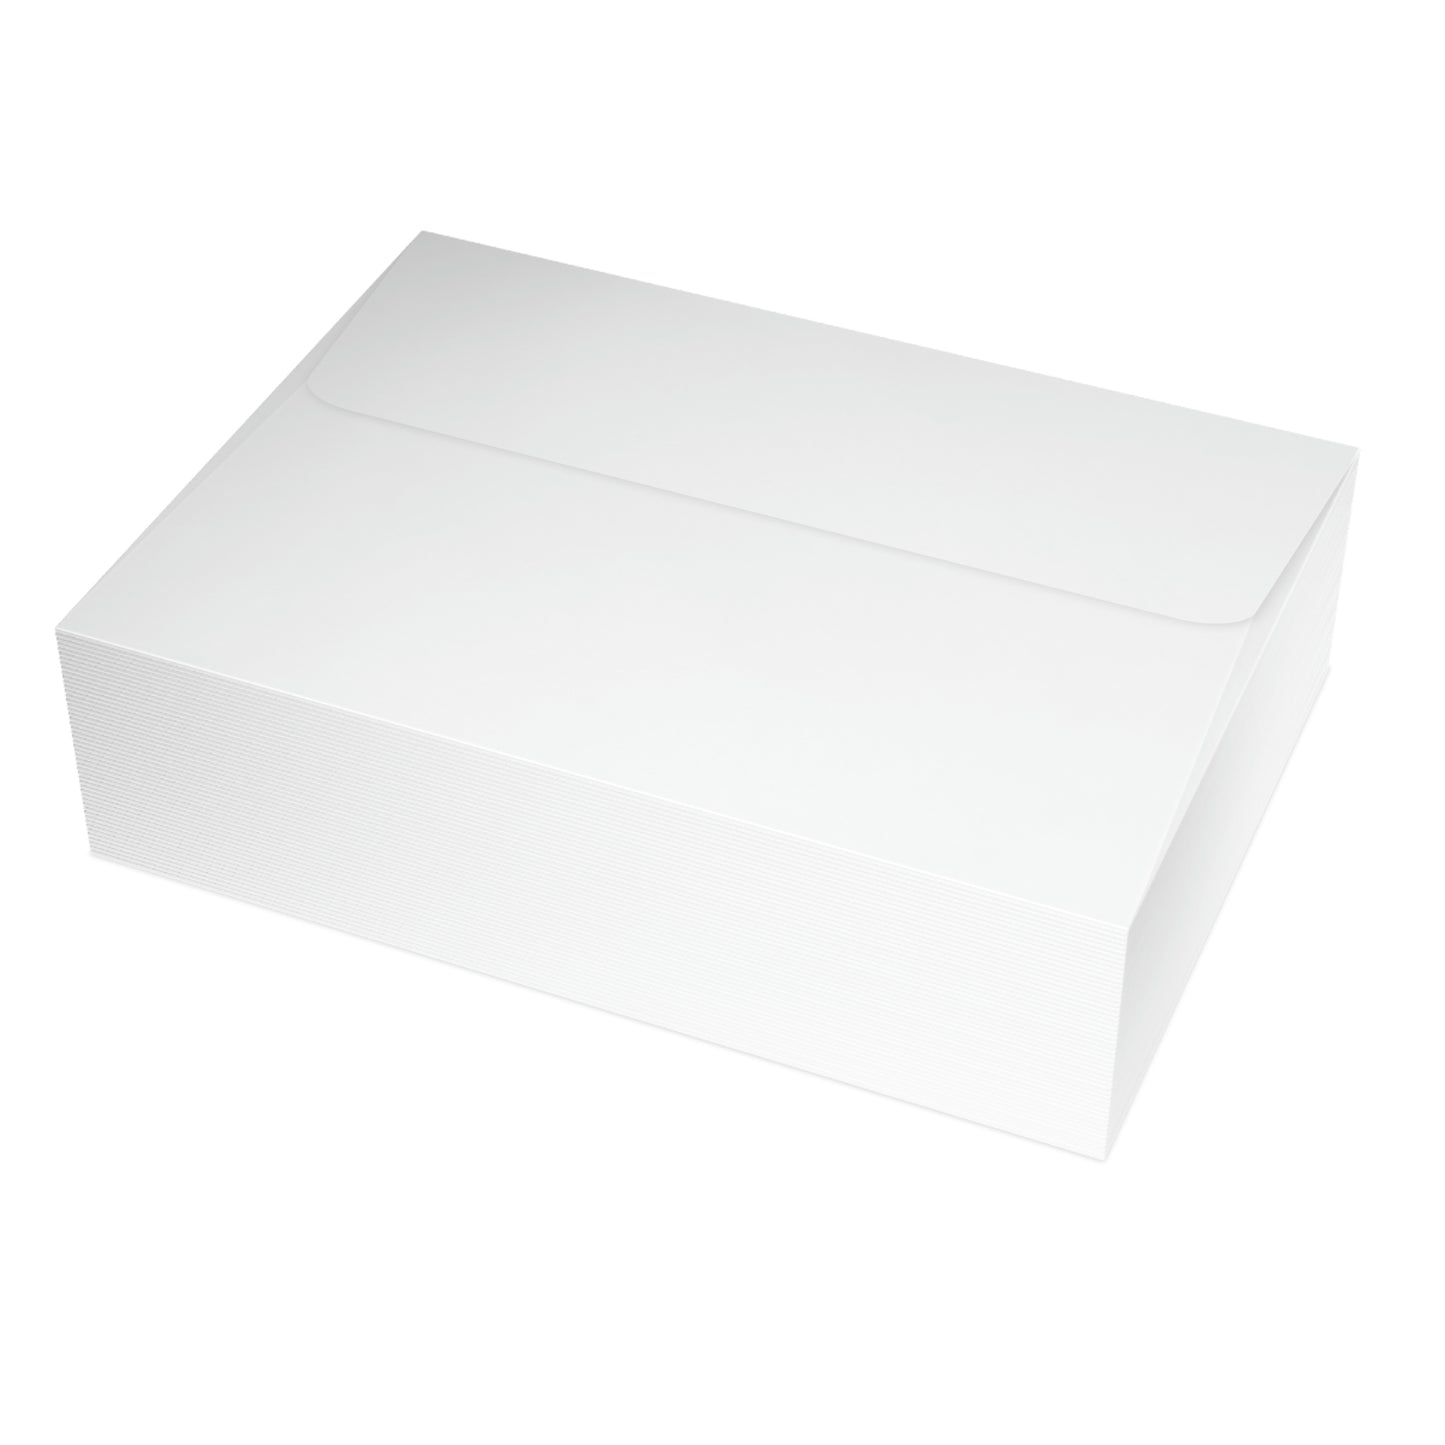 Folded Greeting Cards Horizontal (1, 10, 30, and 50pcs) Stay Focused - Design No.1700